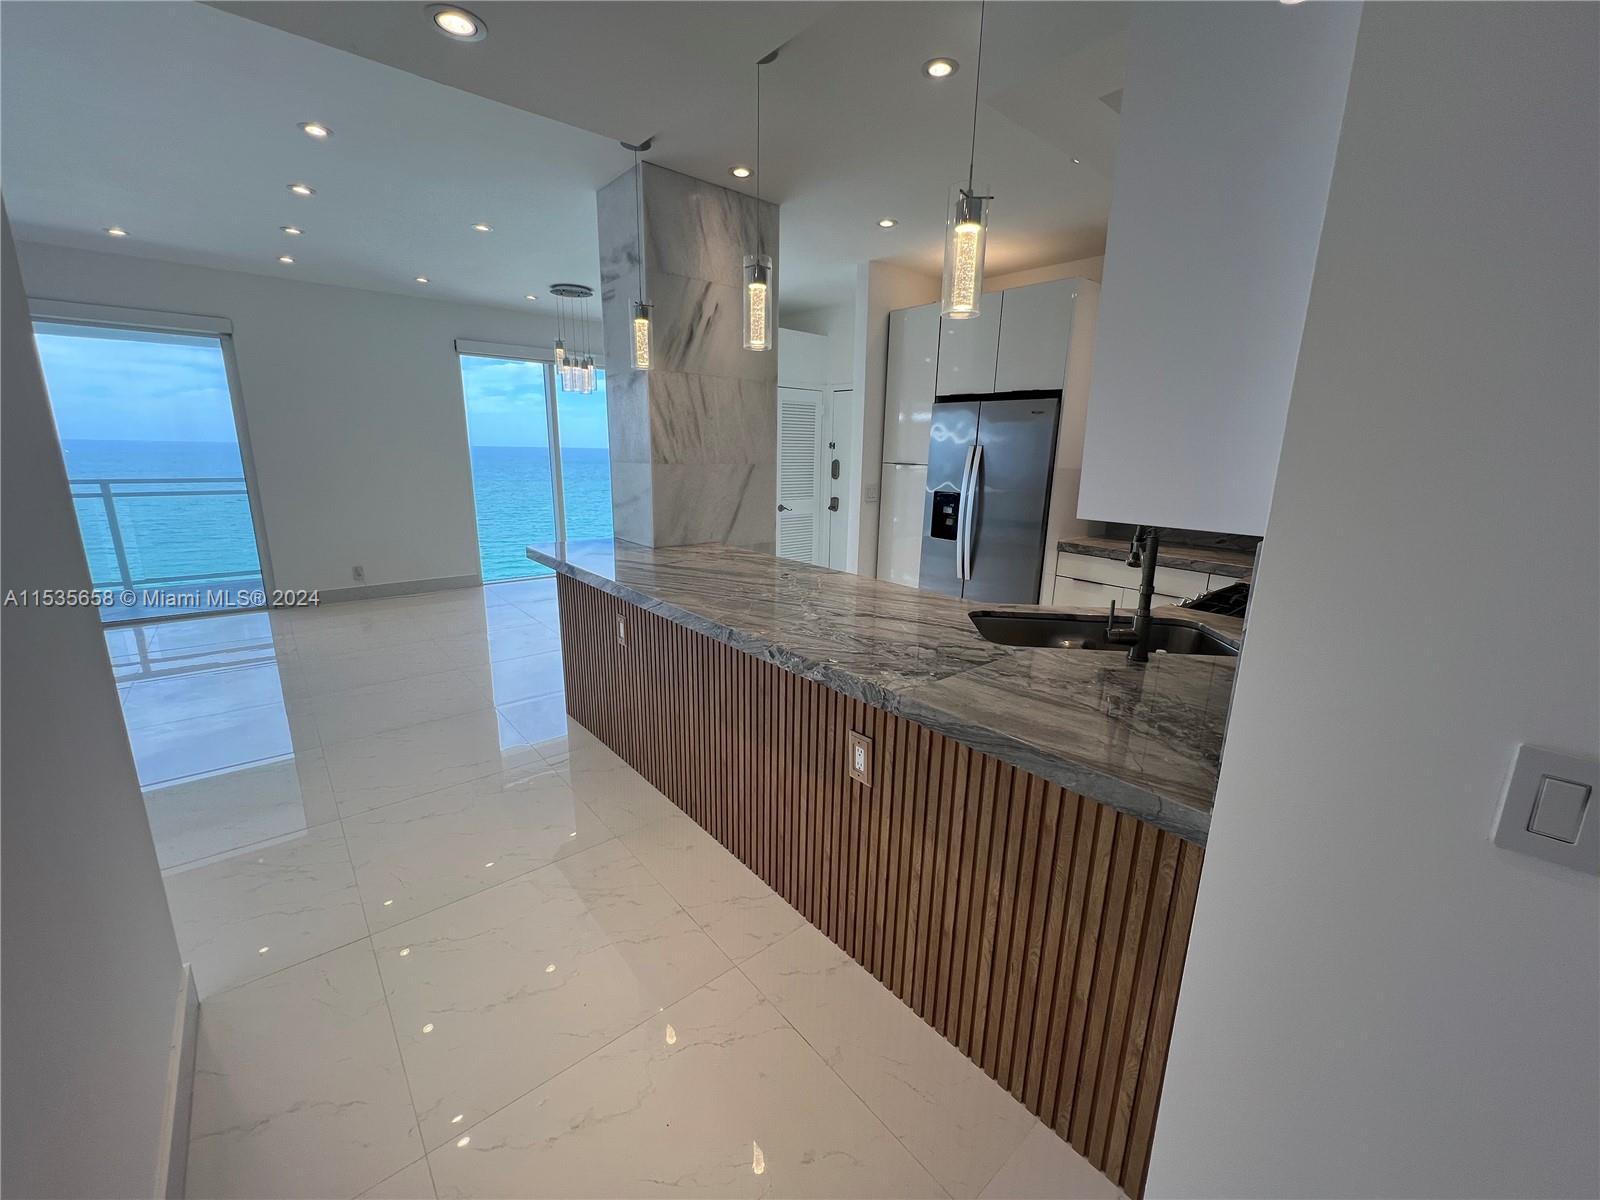 Completely remodeled Penthouse with unobstructed direct Ocean views. Prime location, close to Aventu